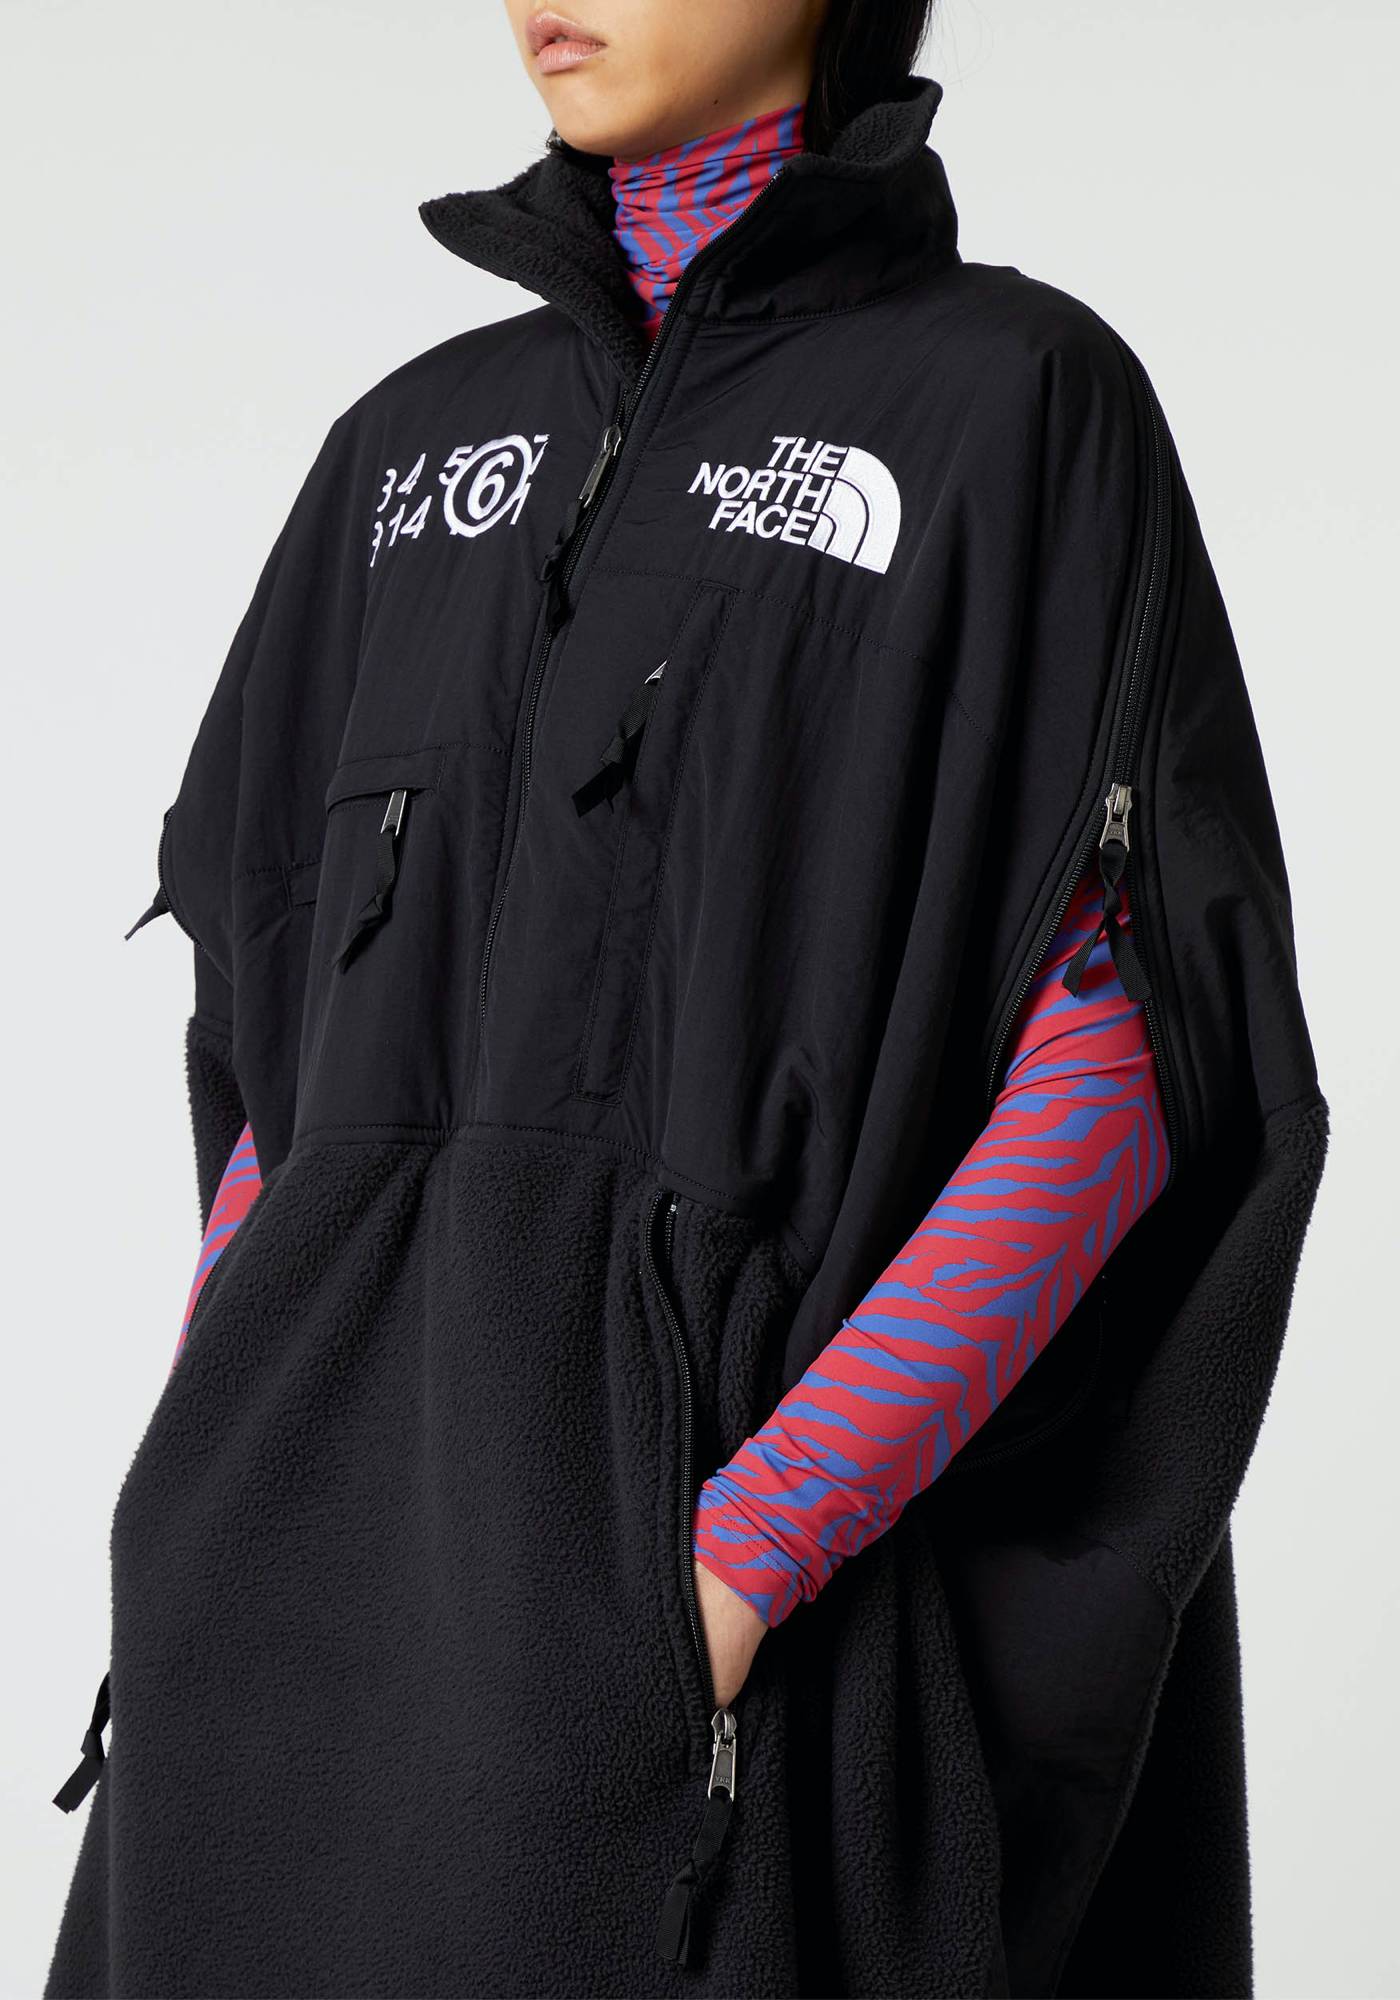 The North Face Mm6